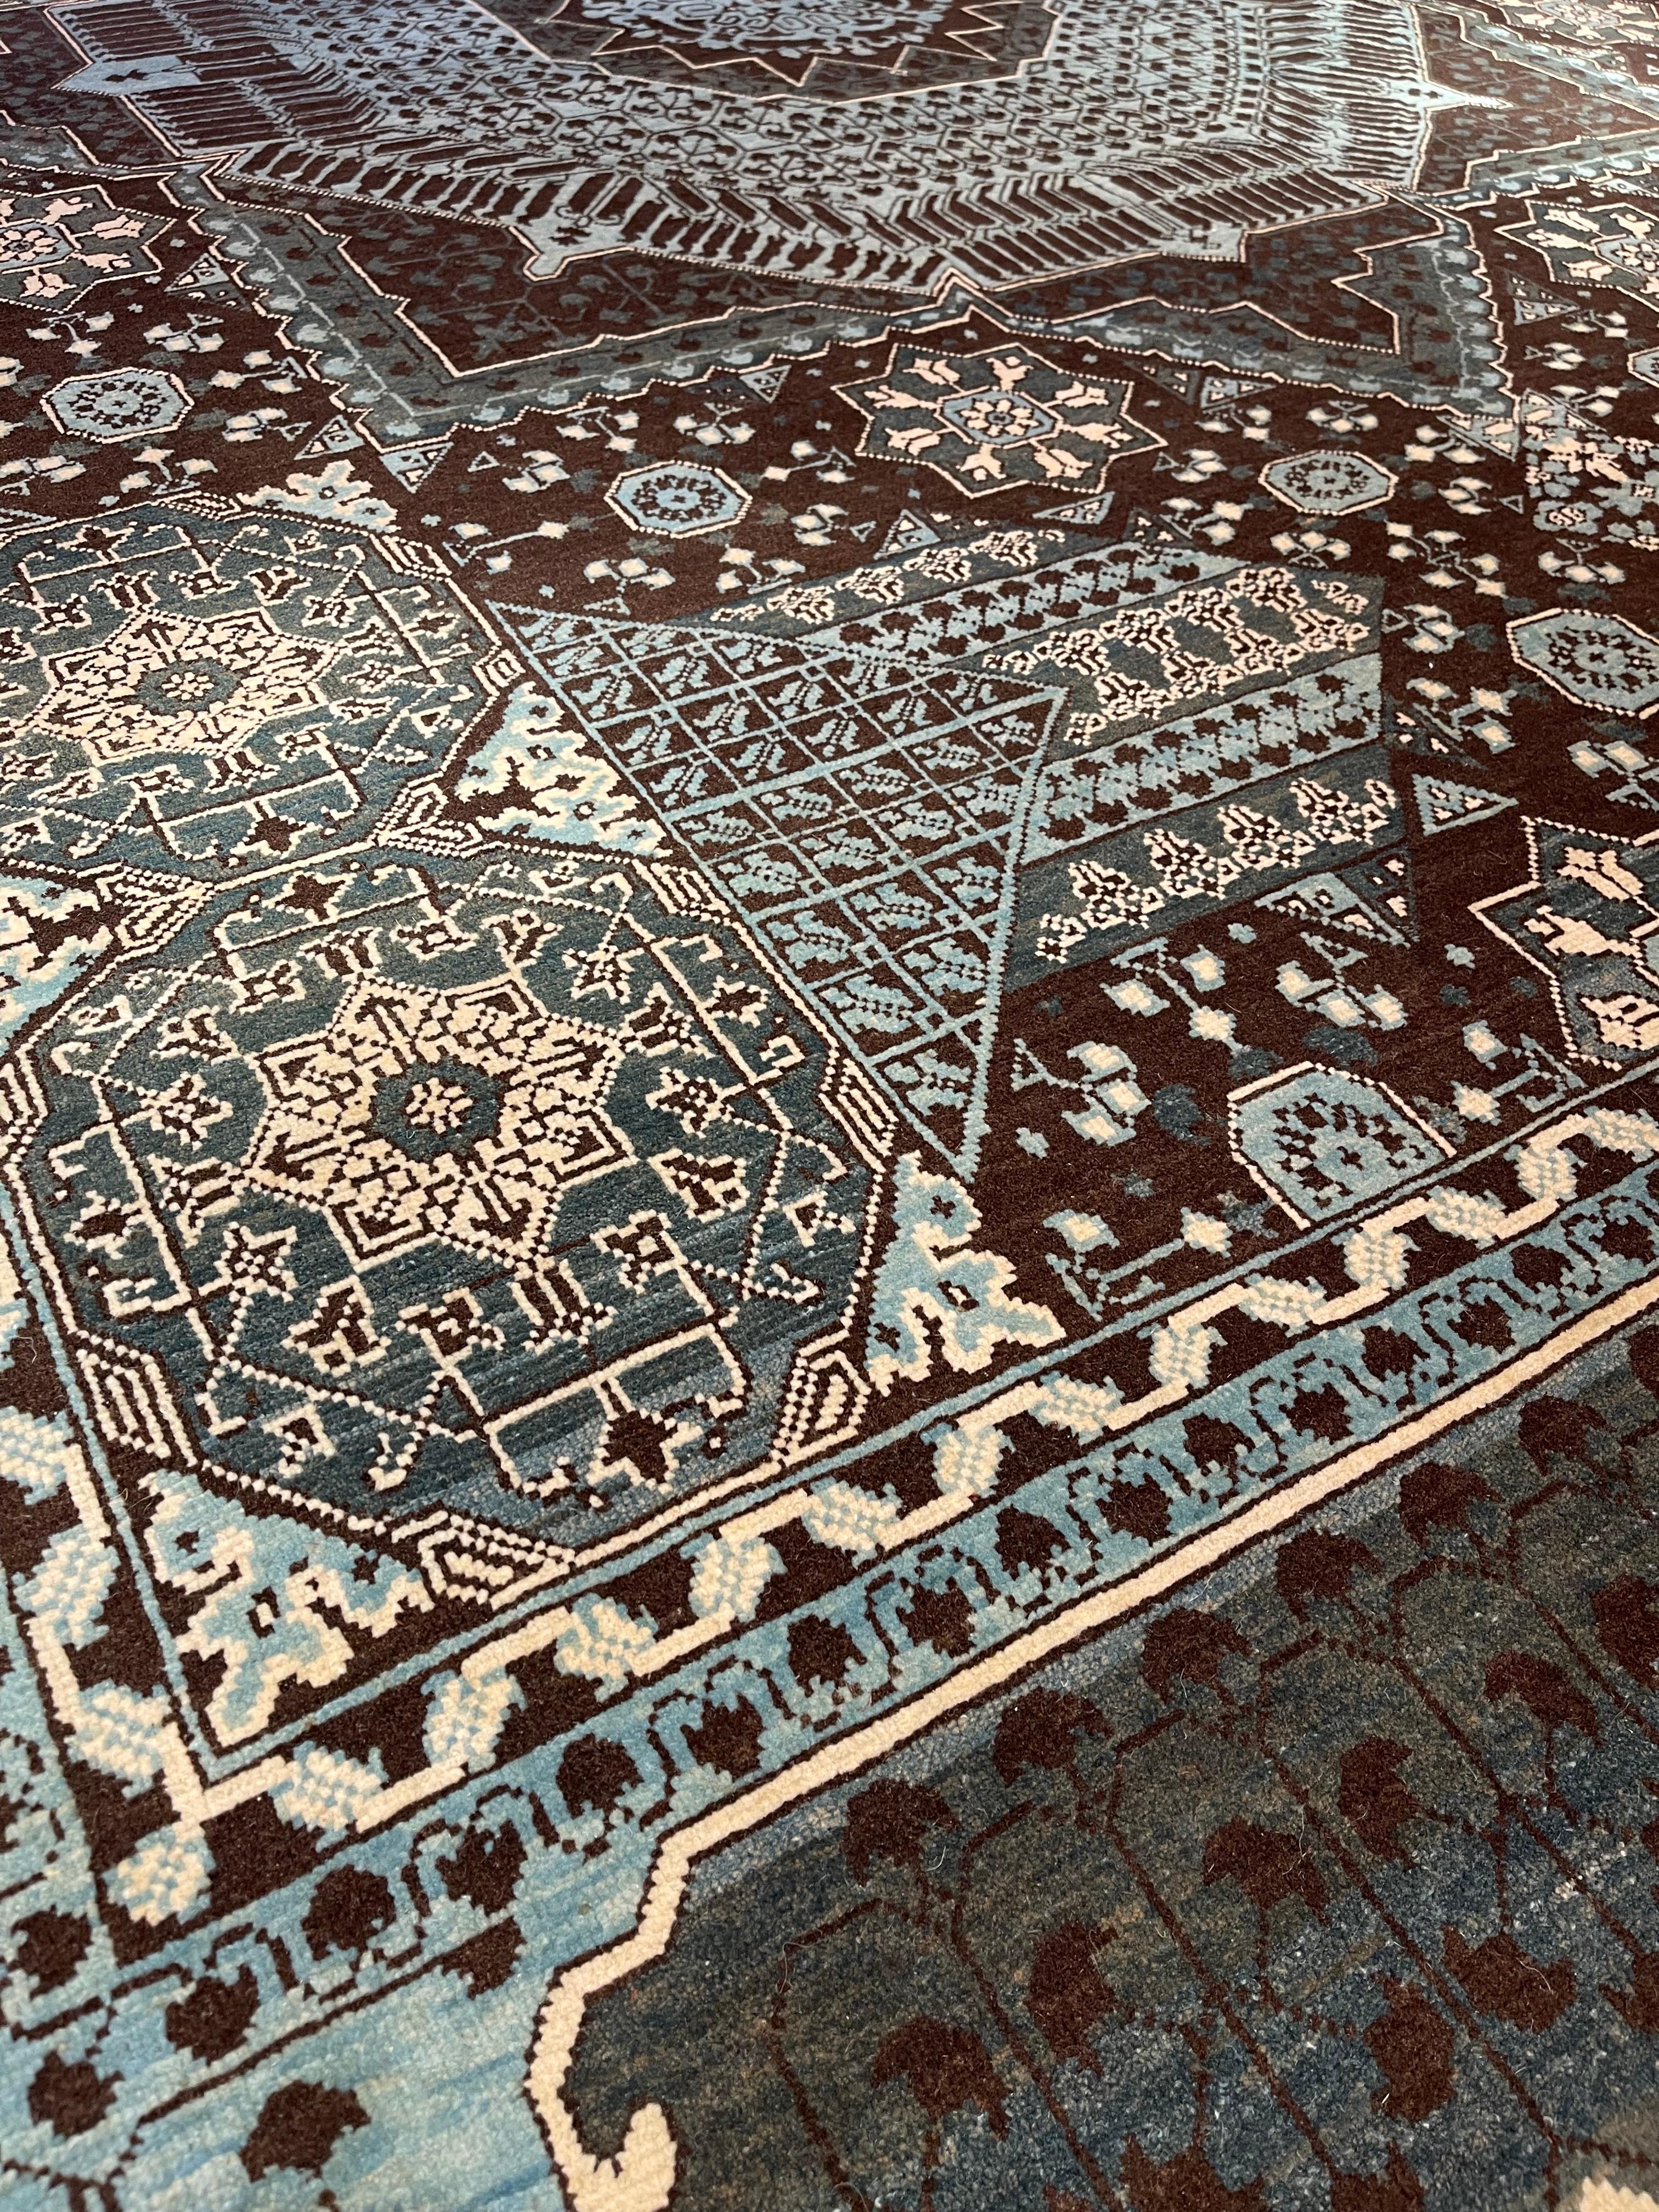 The source of carpet comes from the book how to Rread – Islamic Carpets, Walter B. Denny, The Metropolitan Museum of Art, New York 2014 fig.61,62. The five-star-medallion carpet was designed in the early 16th century by Mamluk Sultane of Cairo,